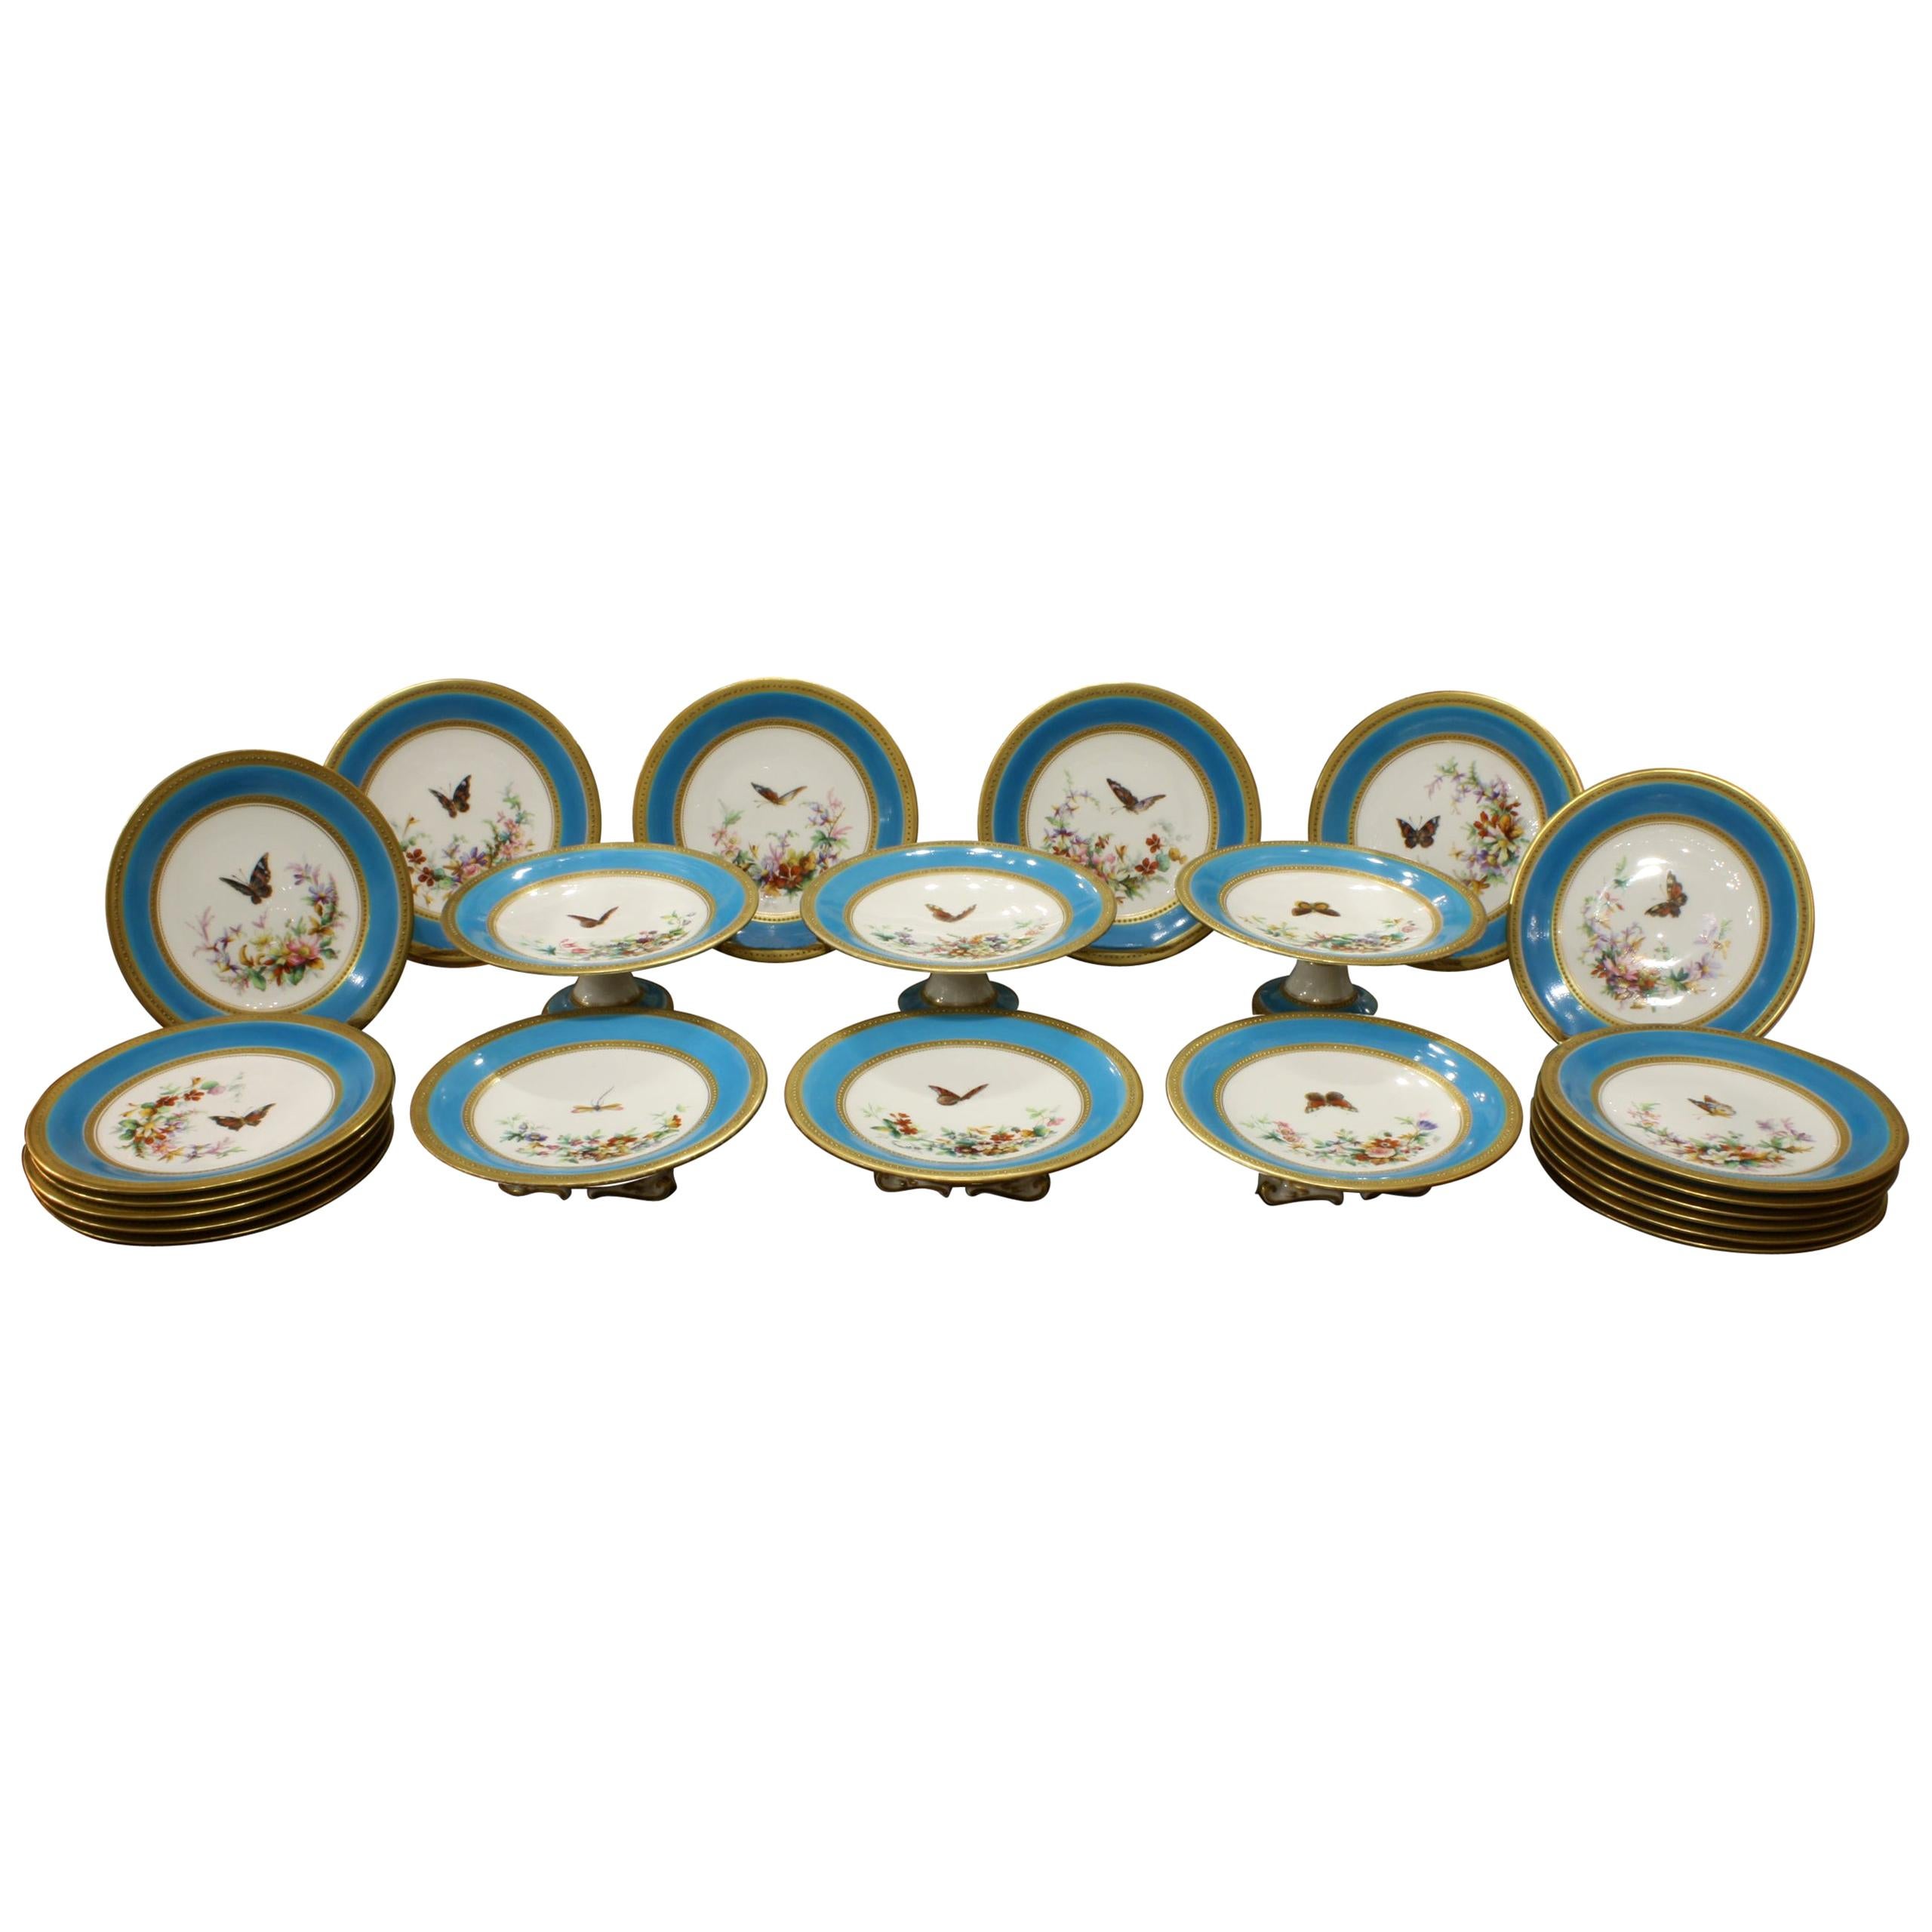 Minton Dessert Service with Butterflies and Flowers and Gold Rims